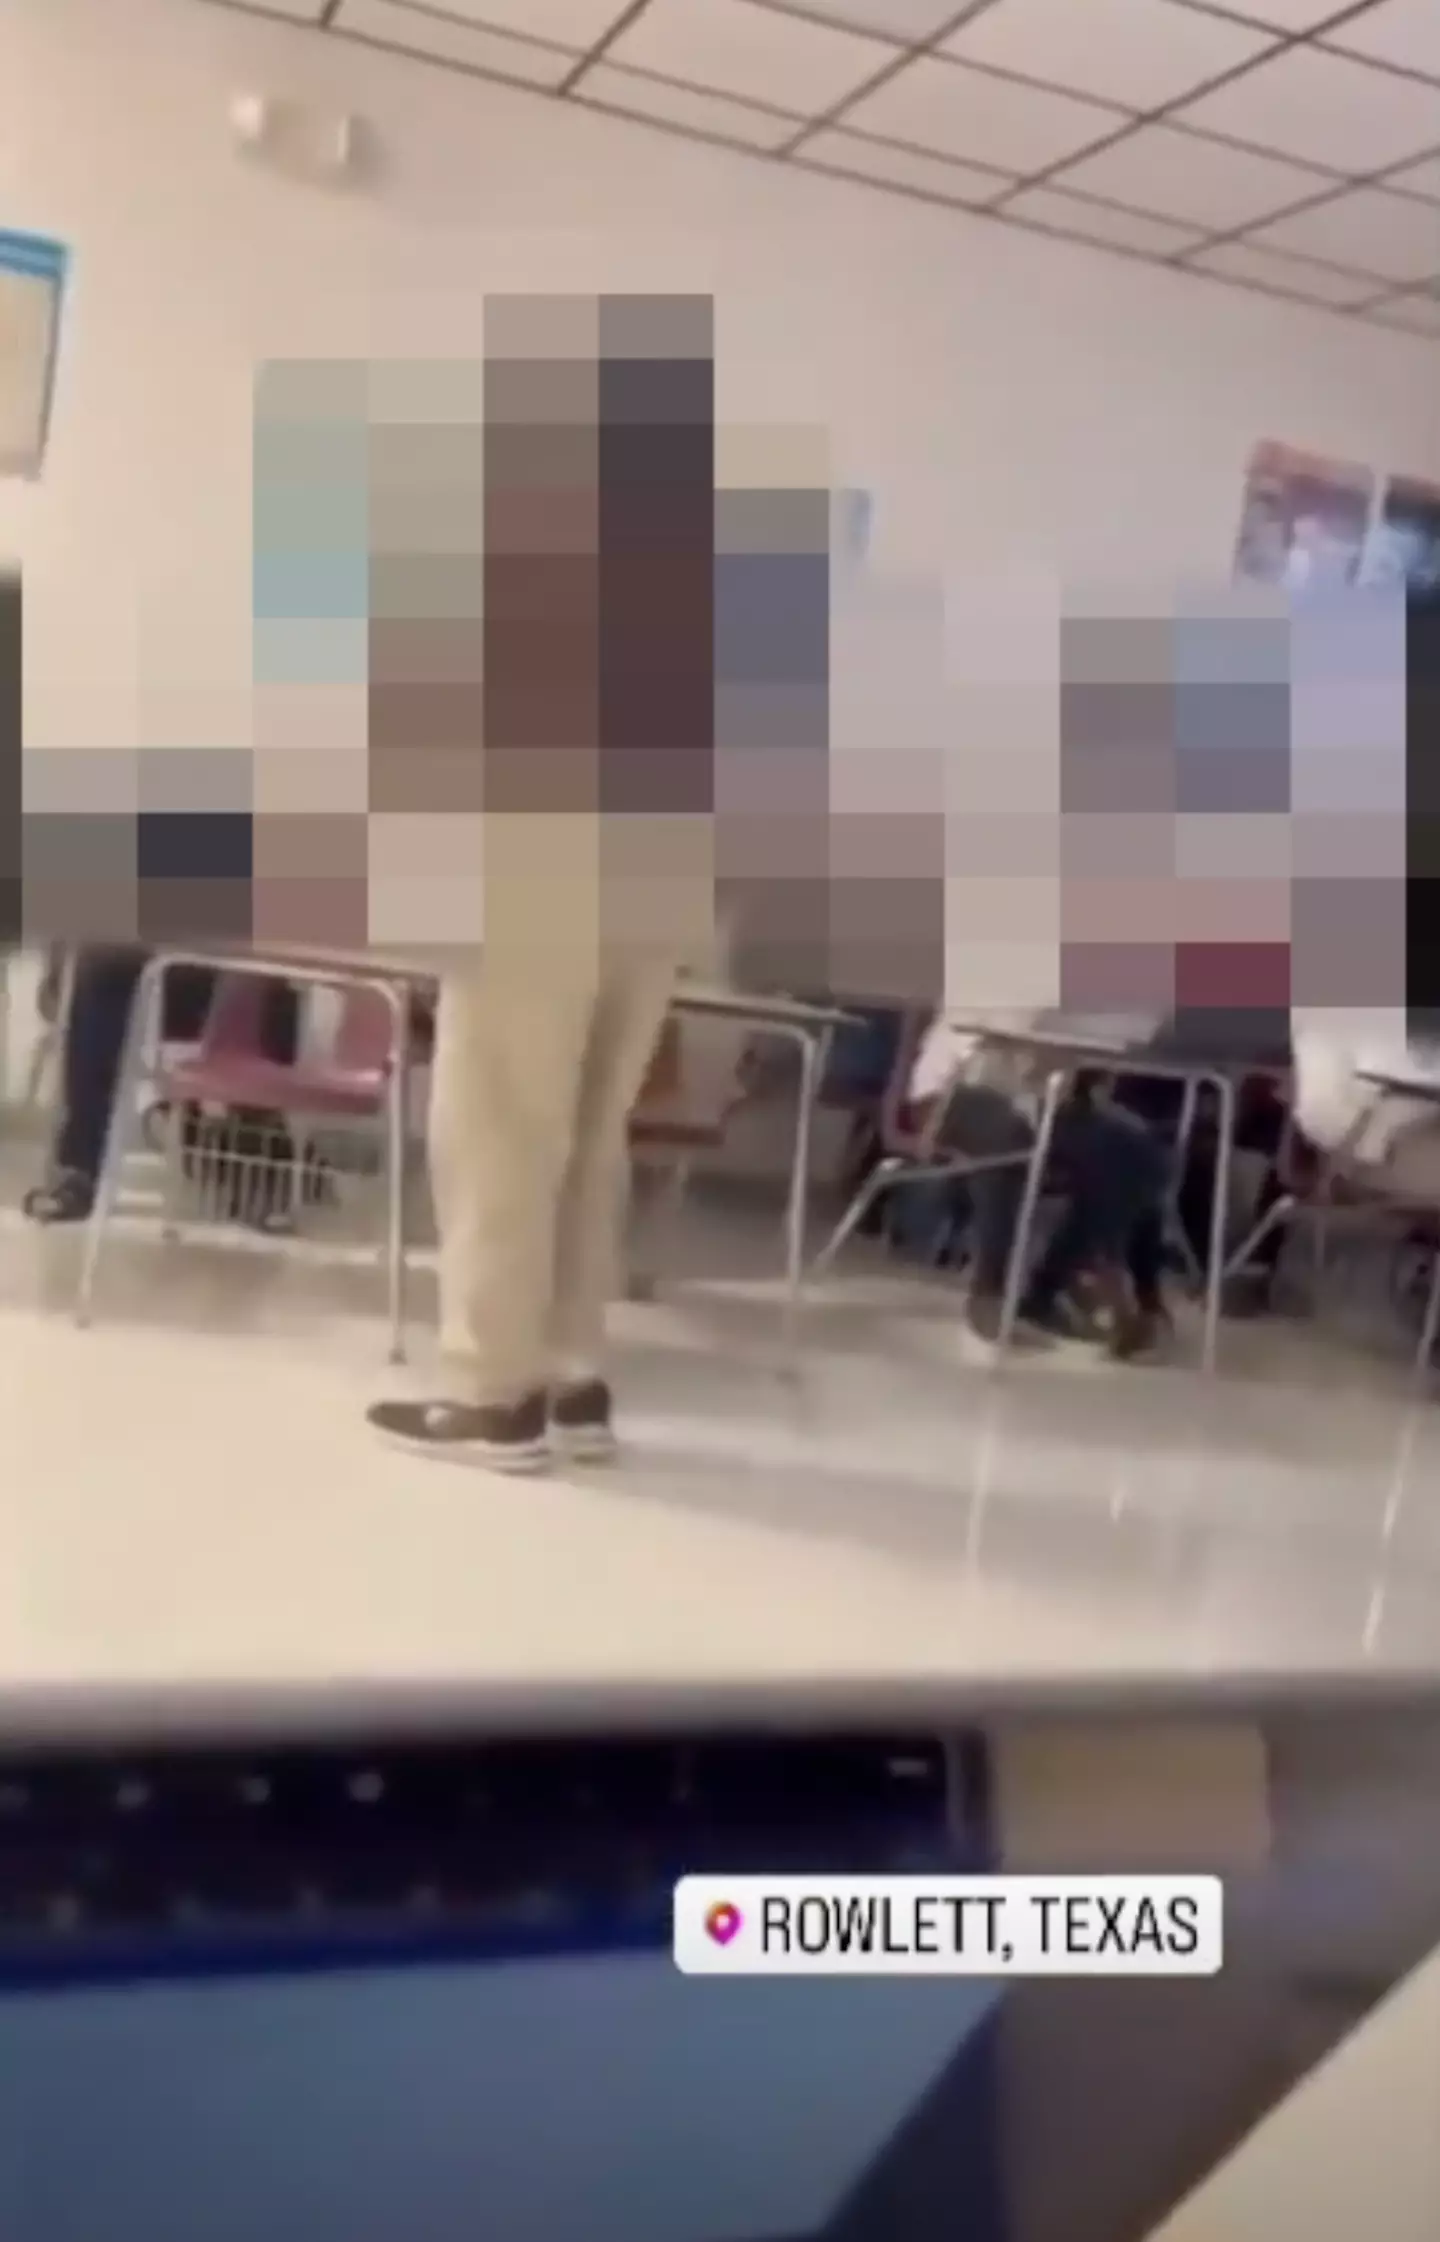 In the video, the teacher can be seen throwing a chair.